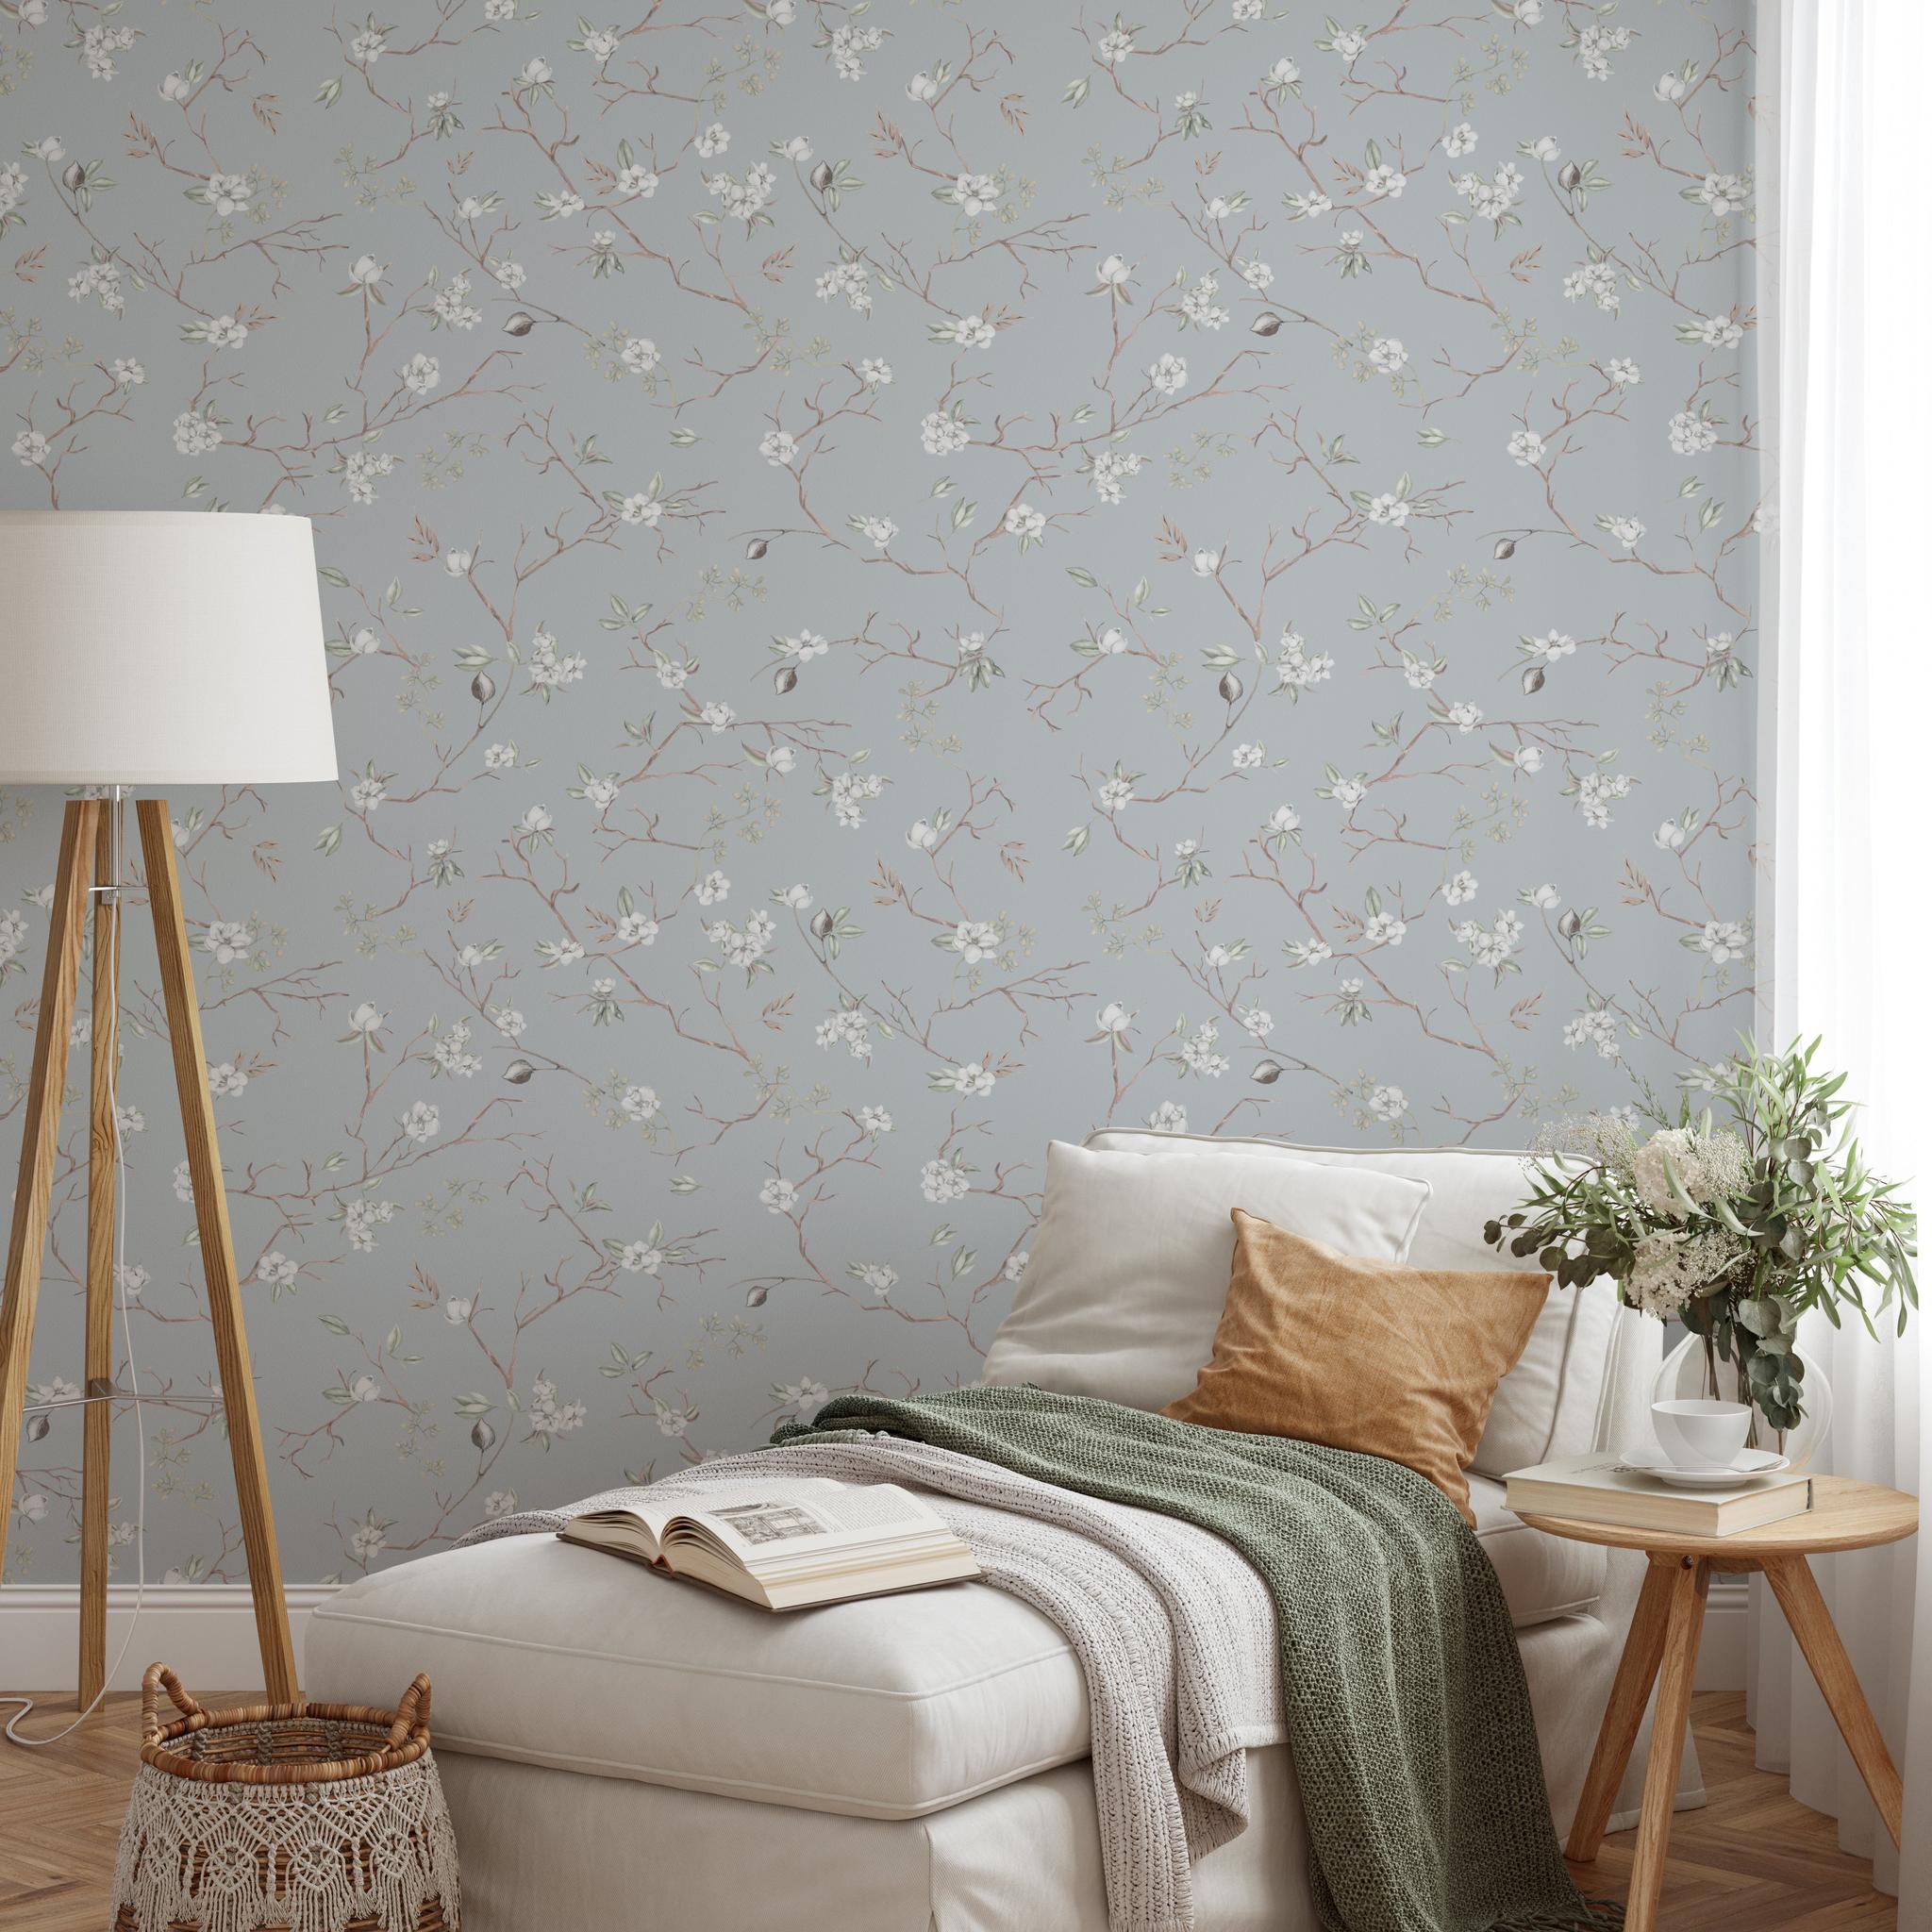 "Wall Blush Versailles Wallpaper in cozy bedroom setting with elegant floral design"